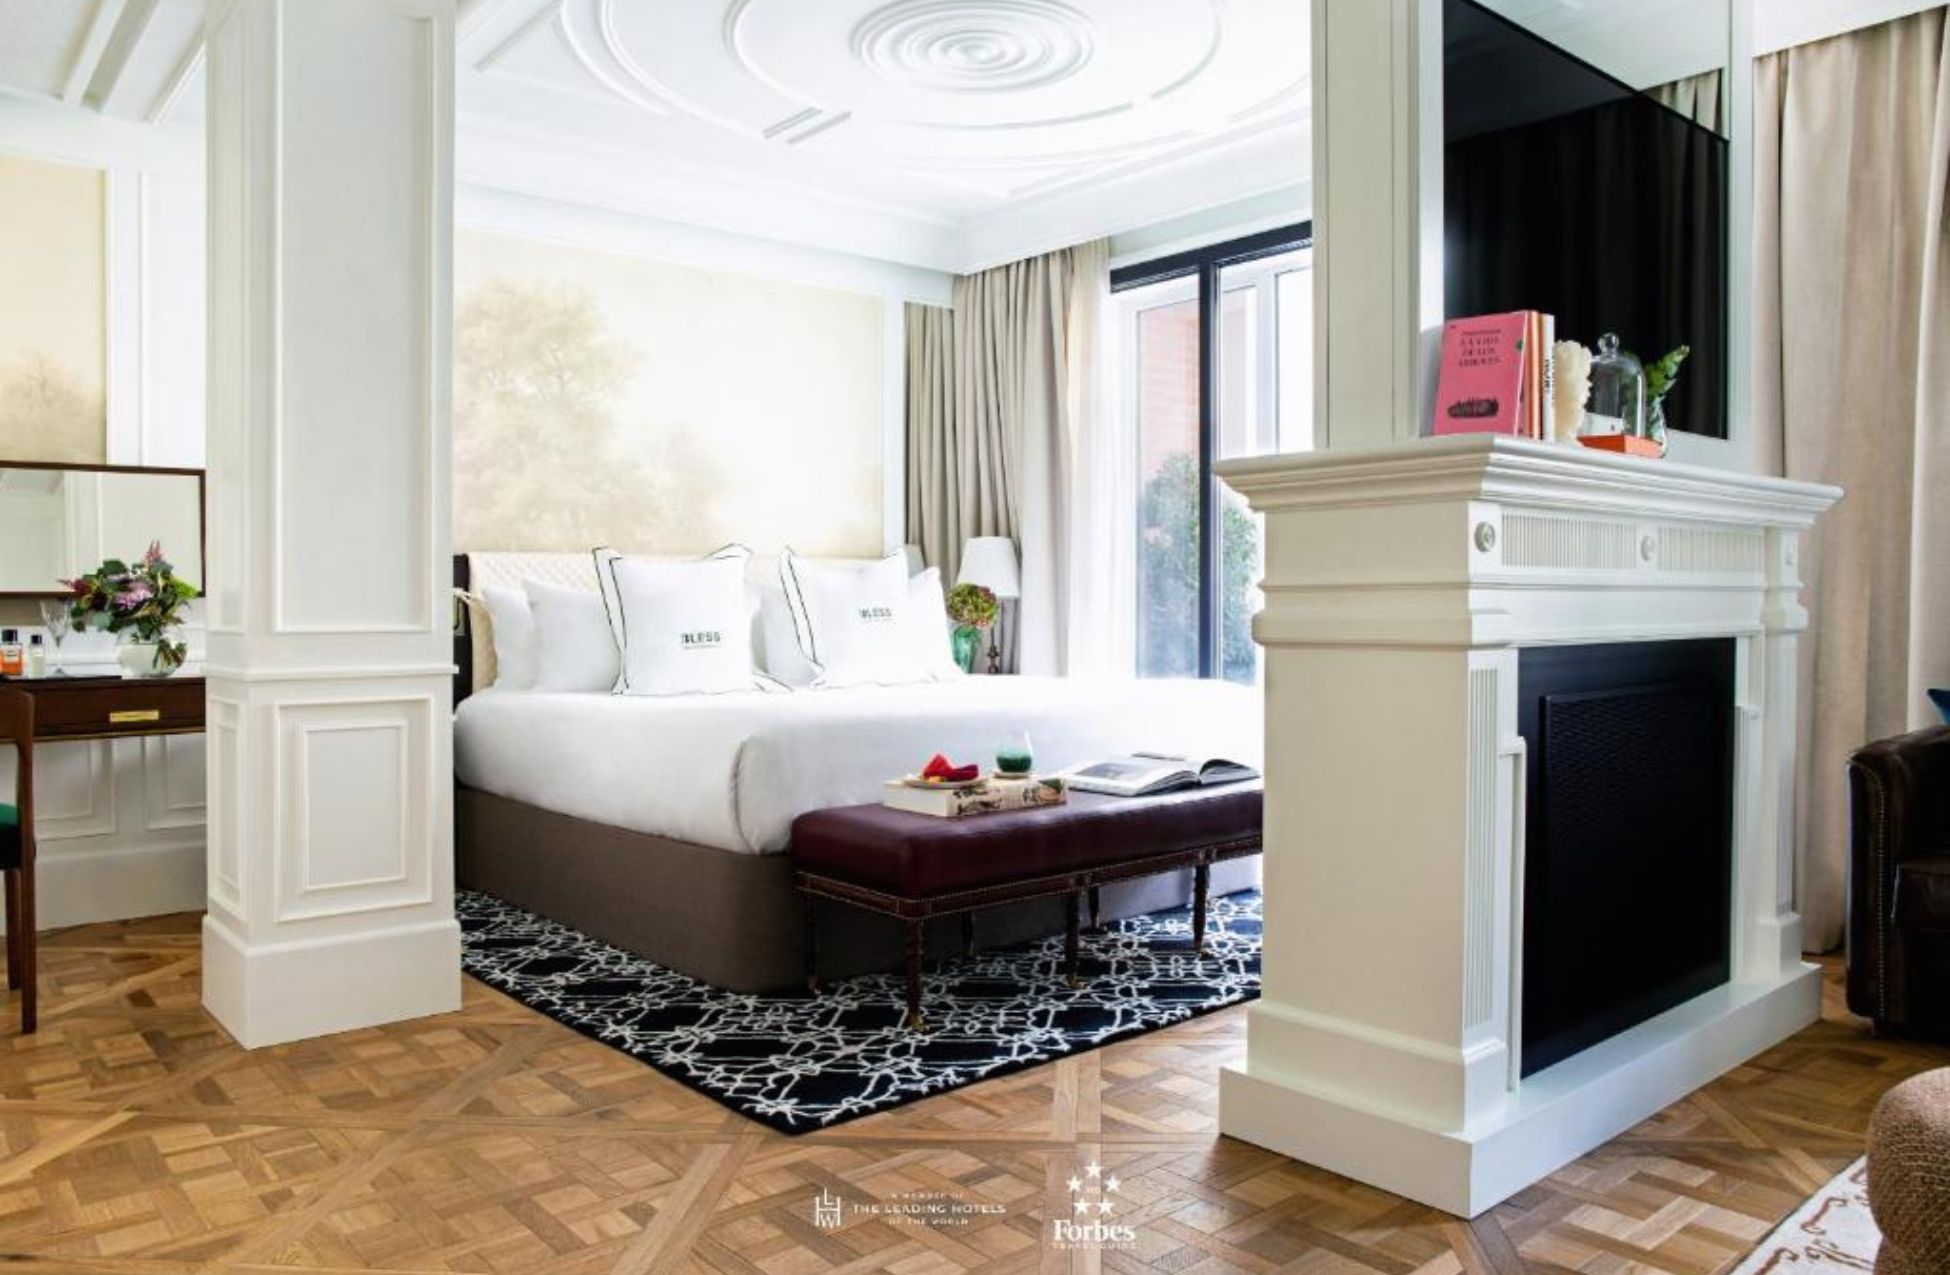 Bless Hotel Madrid - Best Hotels In Madrid